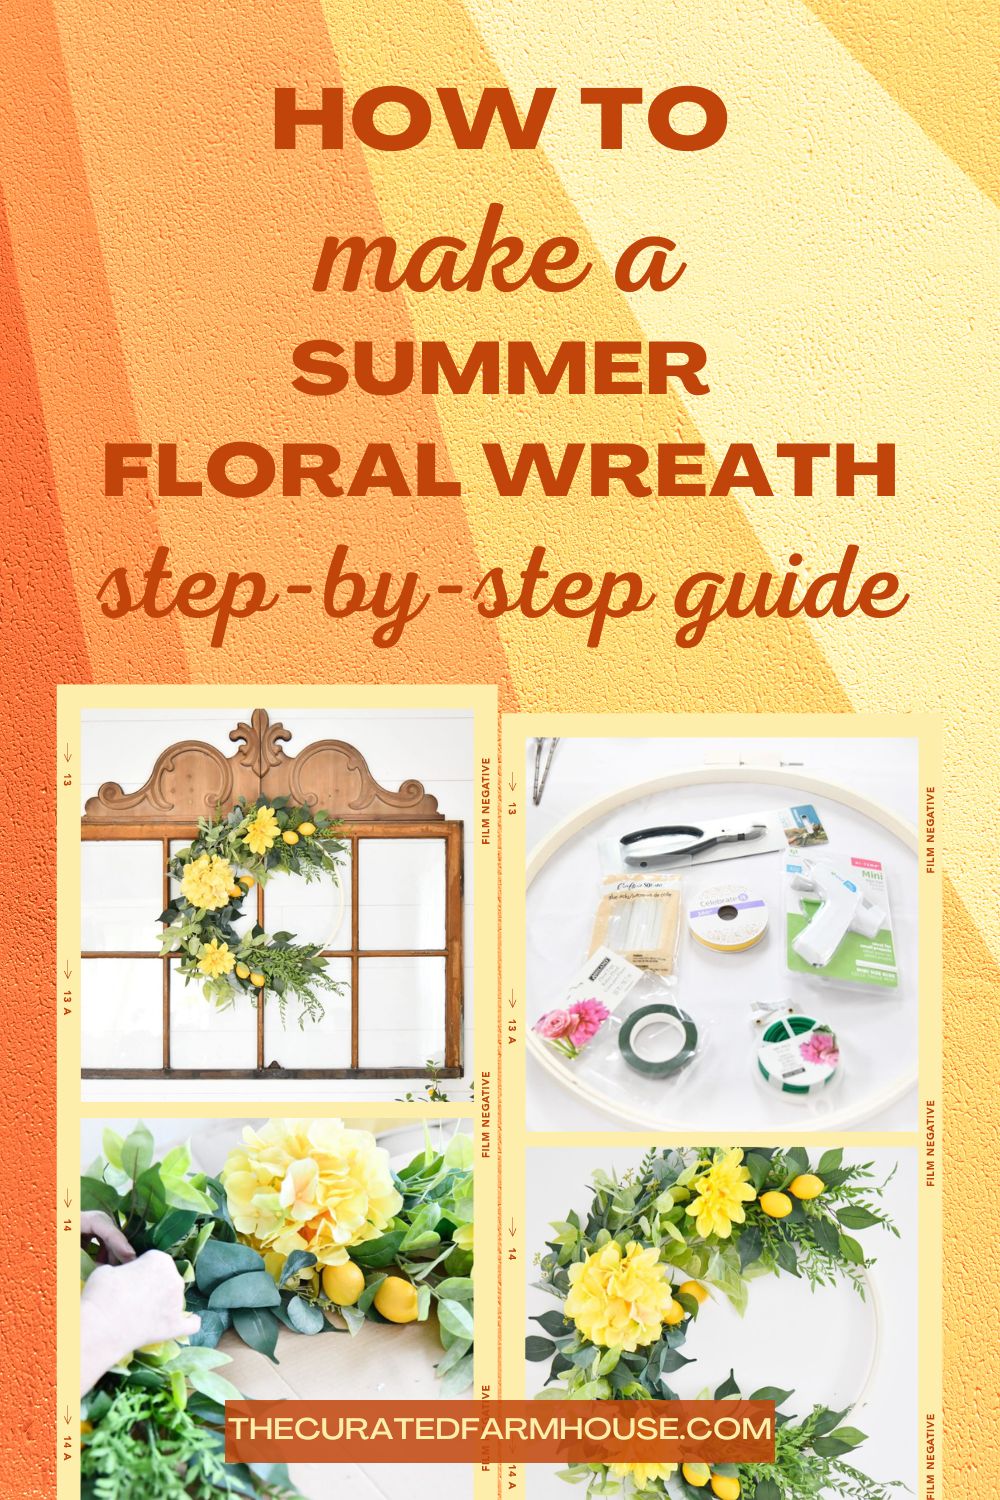 How to Make a Summer Floral Wreath (Step-by-Step Guide)